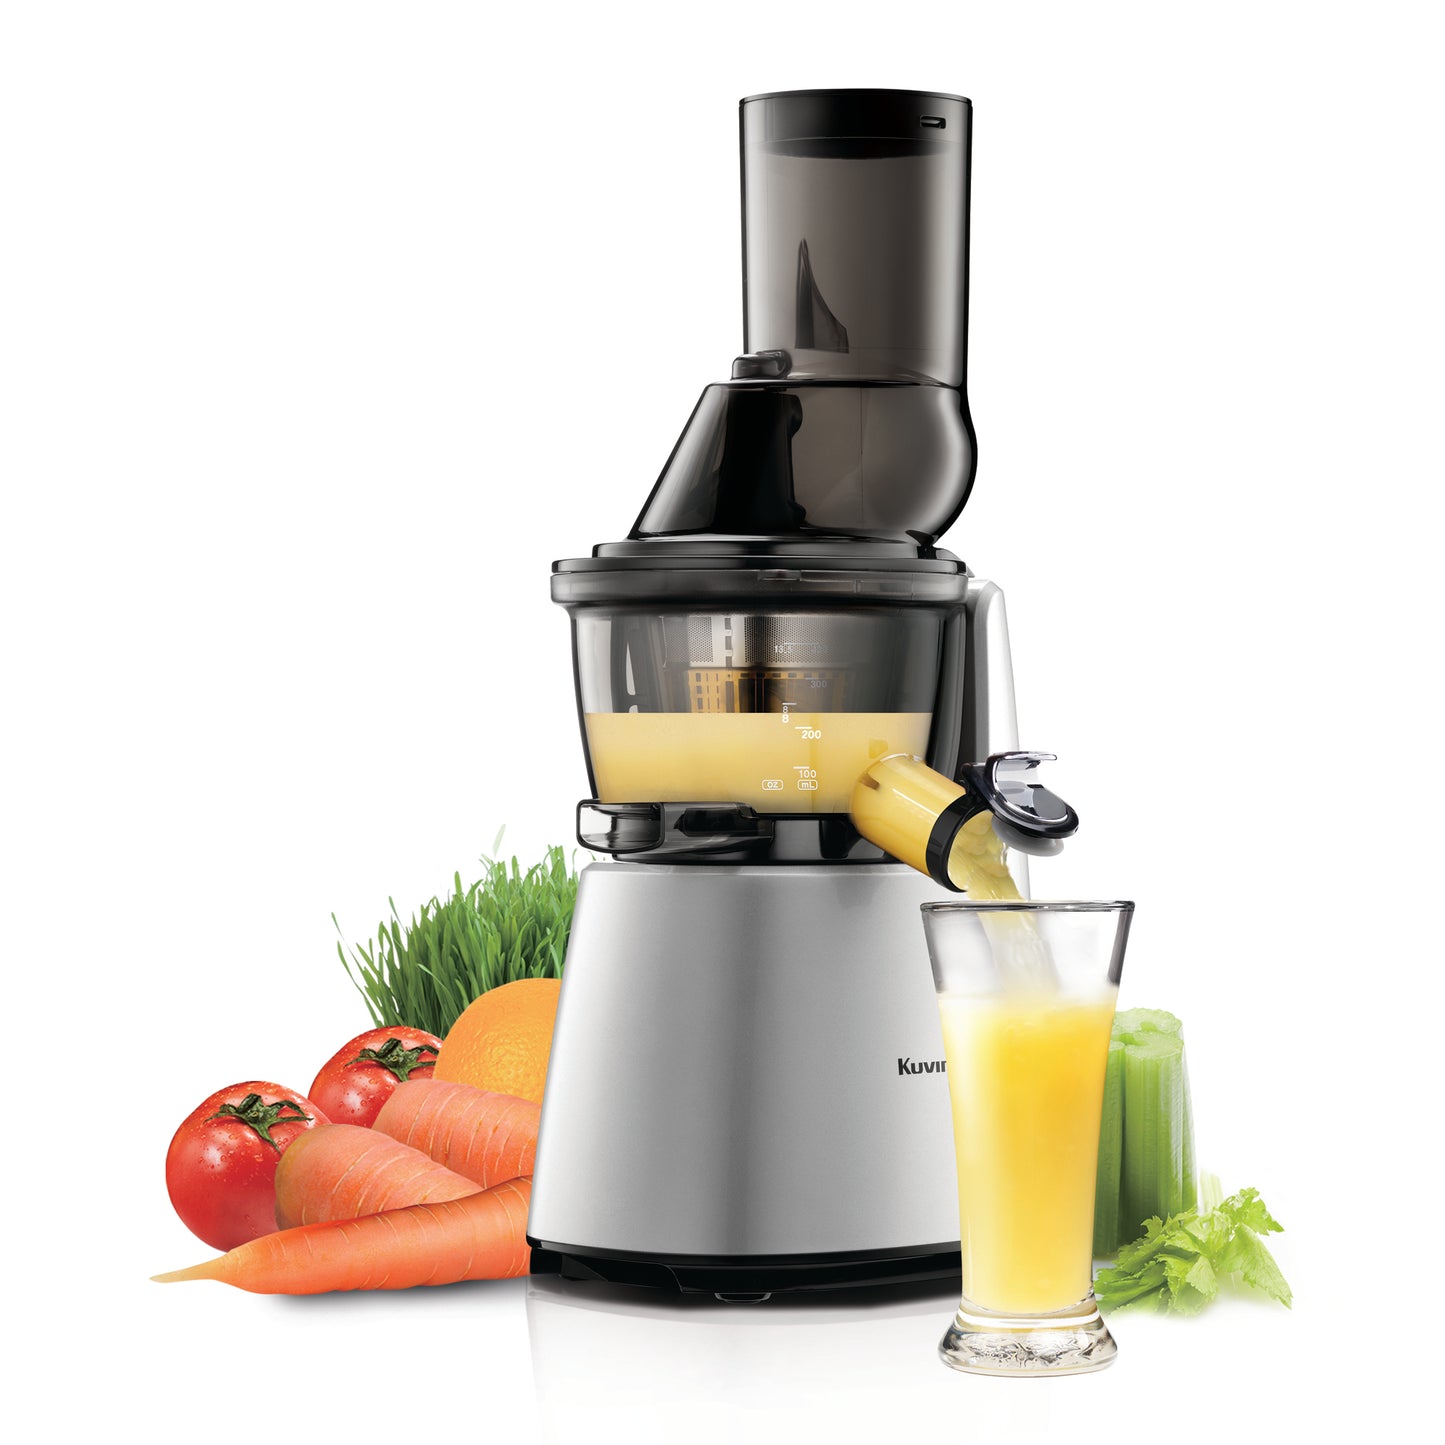 Kuvings Whole Slow Juicer - C7000 Series